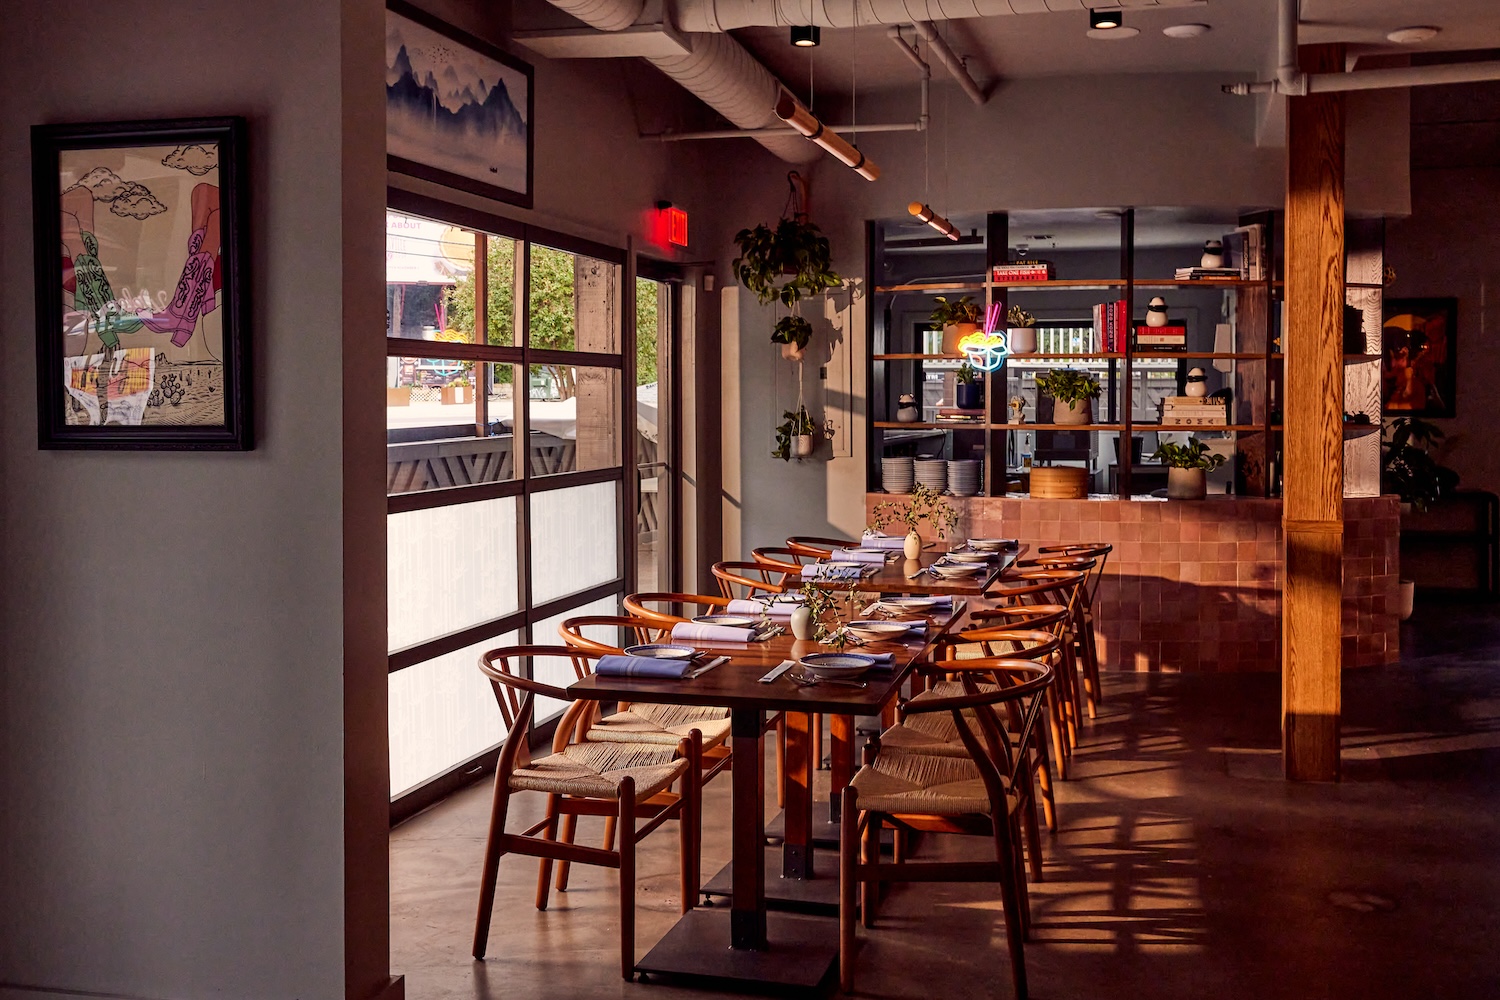 The interior of Zoé Tong, which offers modern Chinese food with a Texas brunch twist